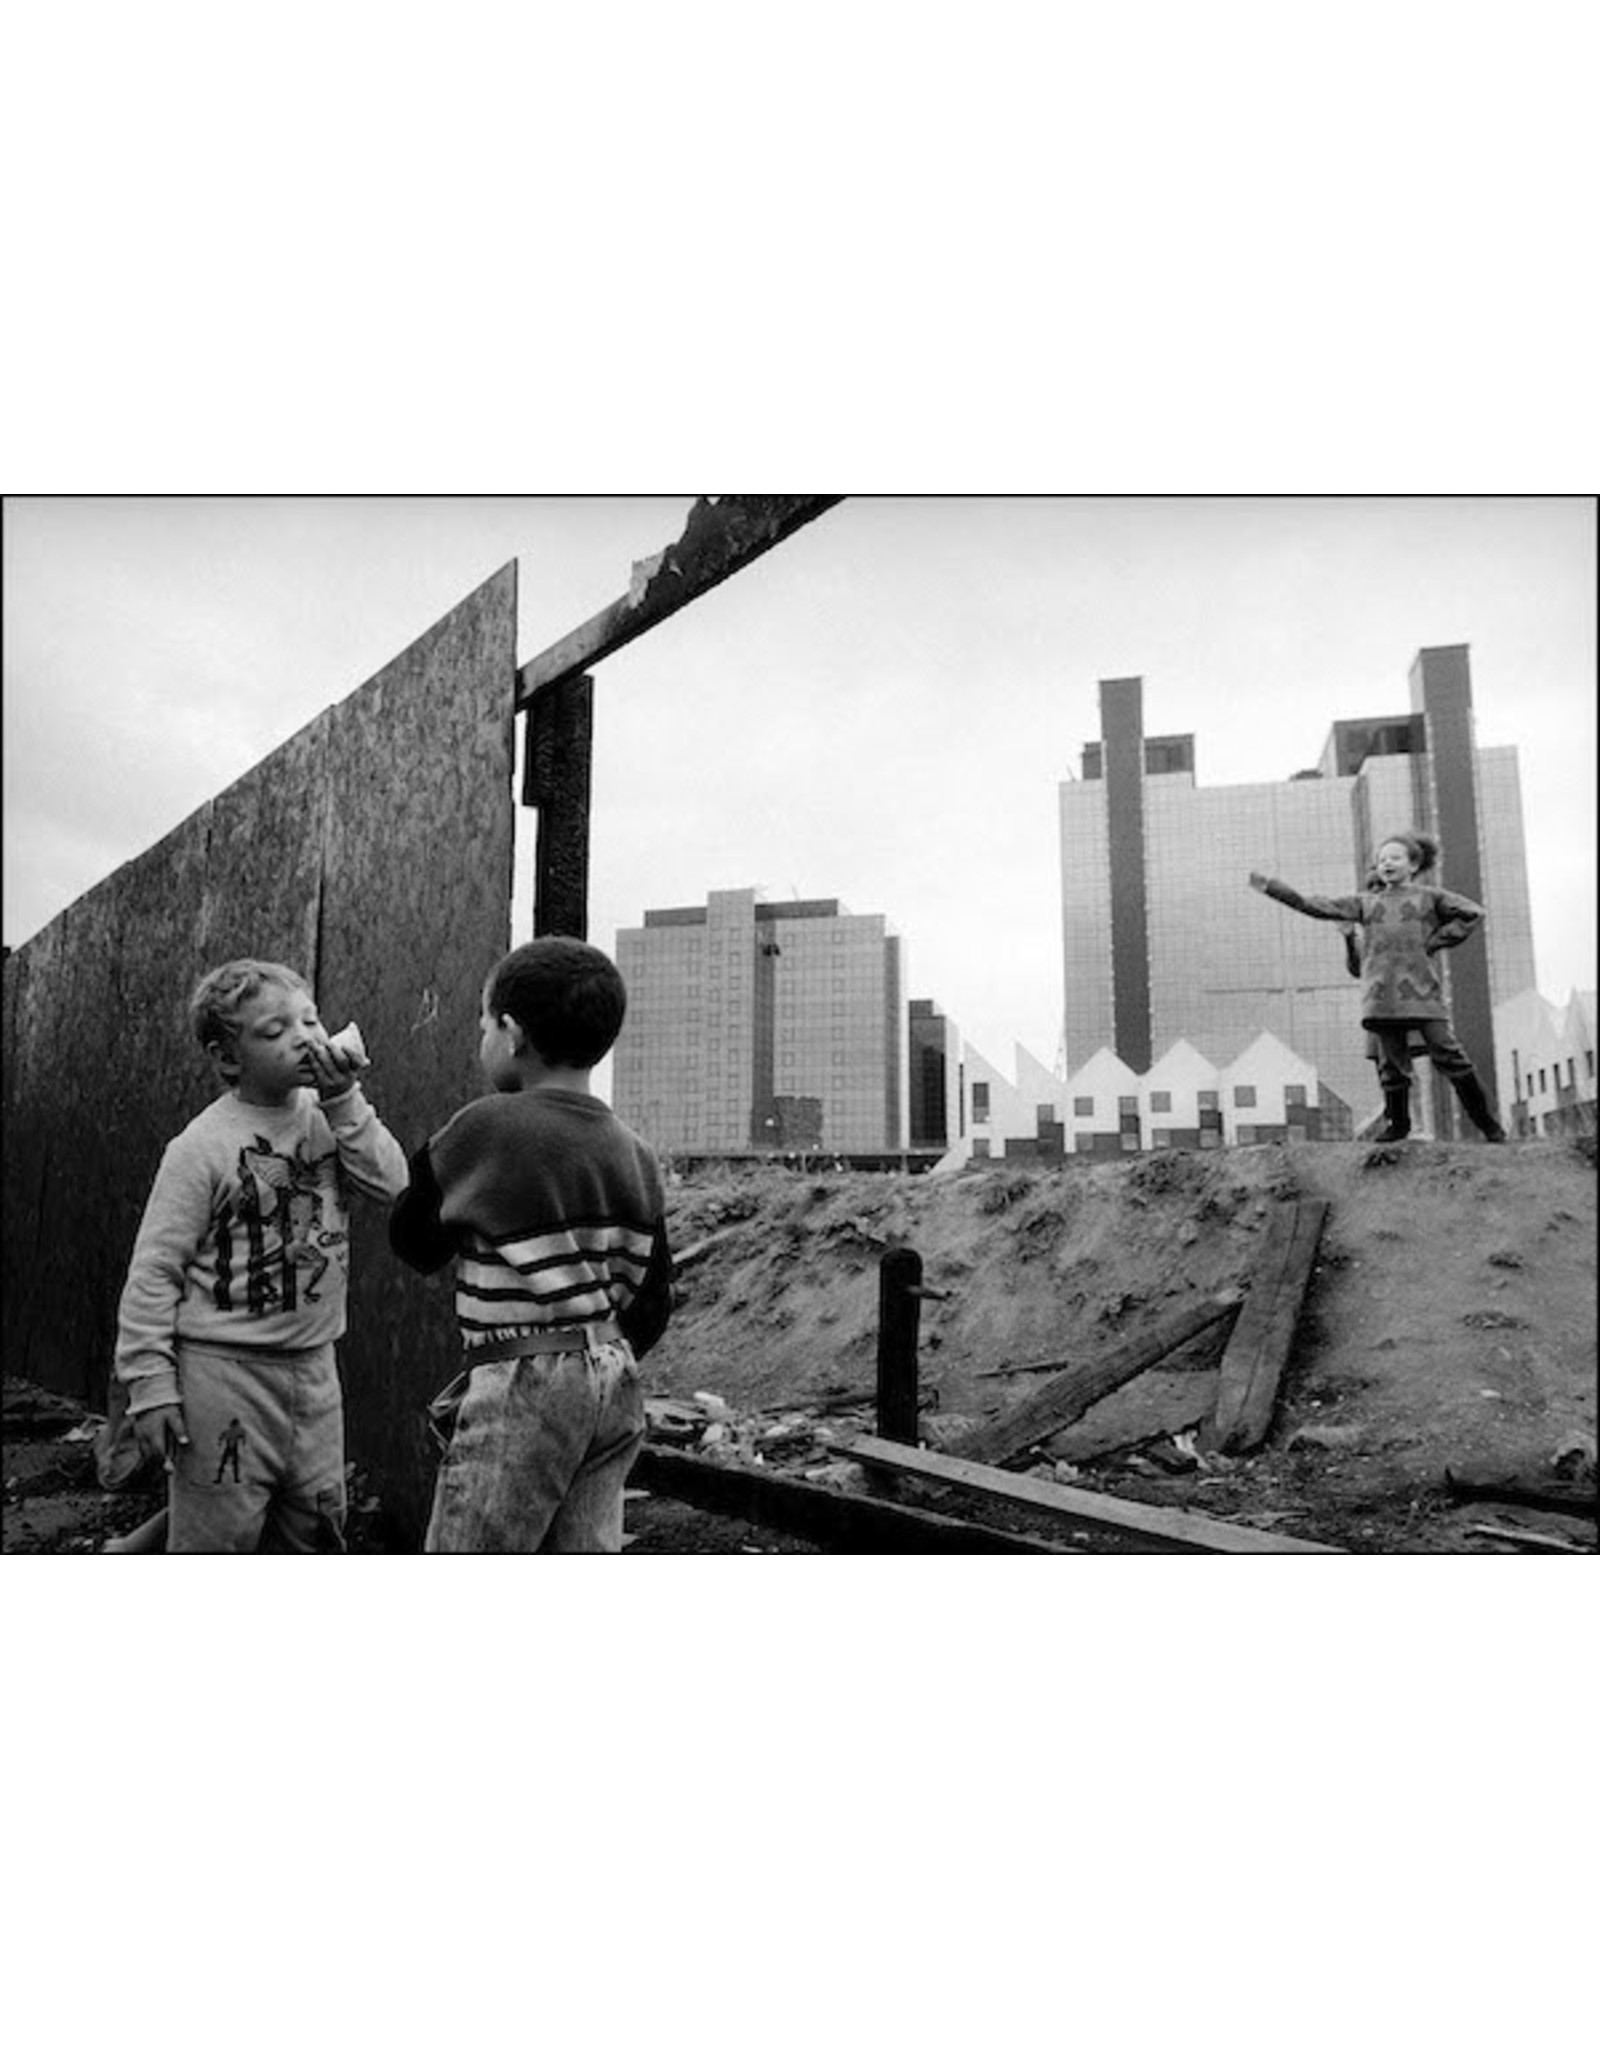 Ian Berry Children Playing on Deserted Ground, Docklands, London. Ian Berry (24)